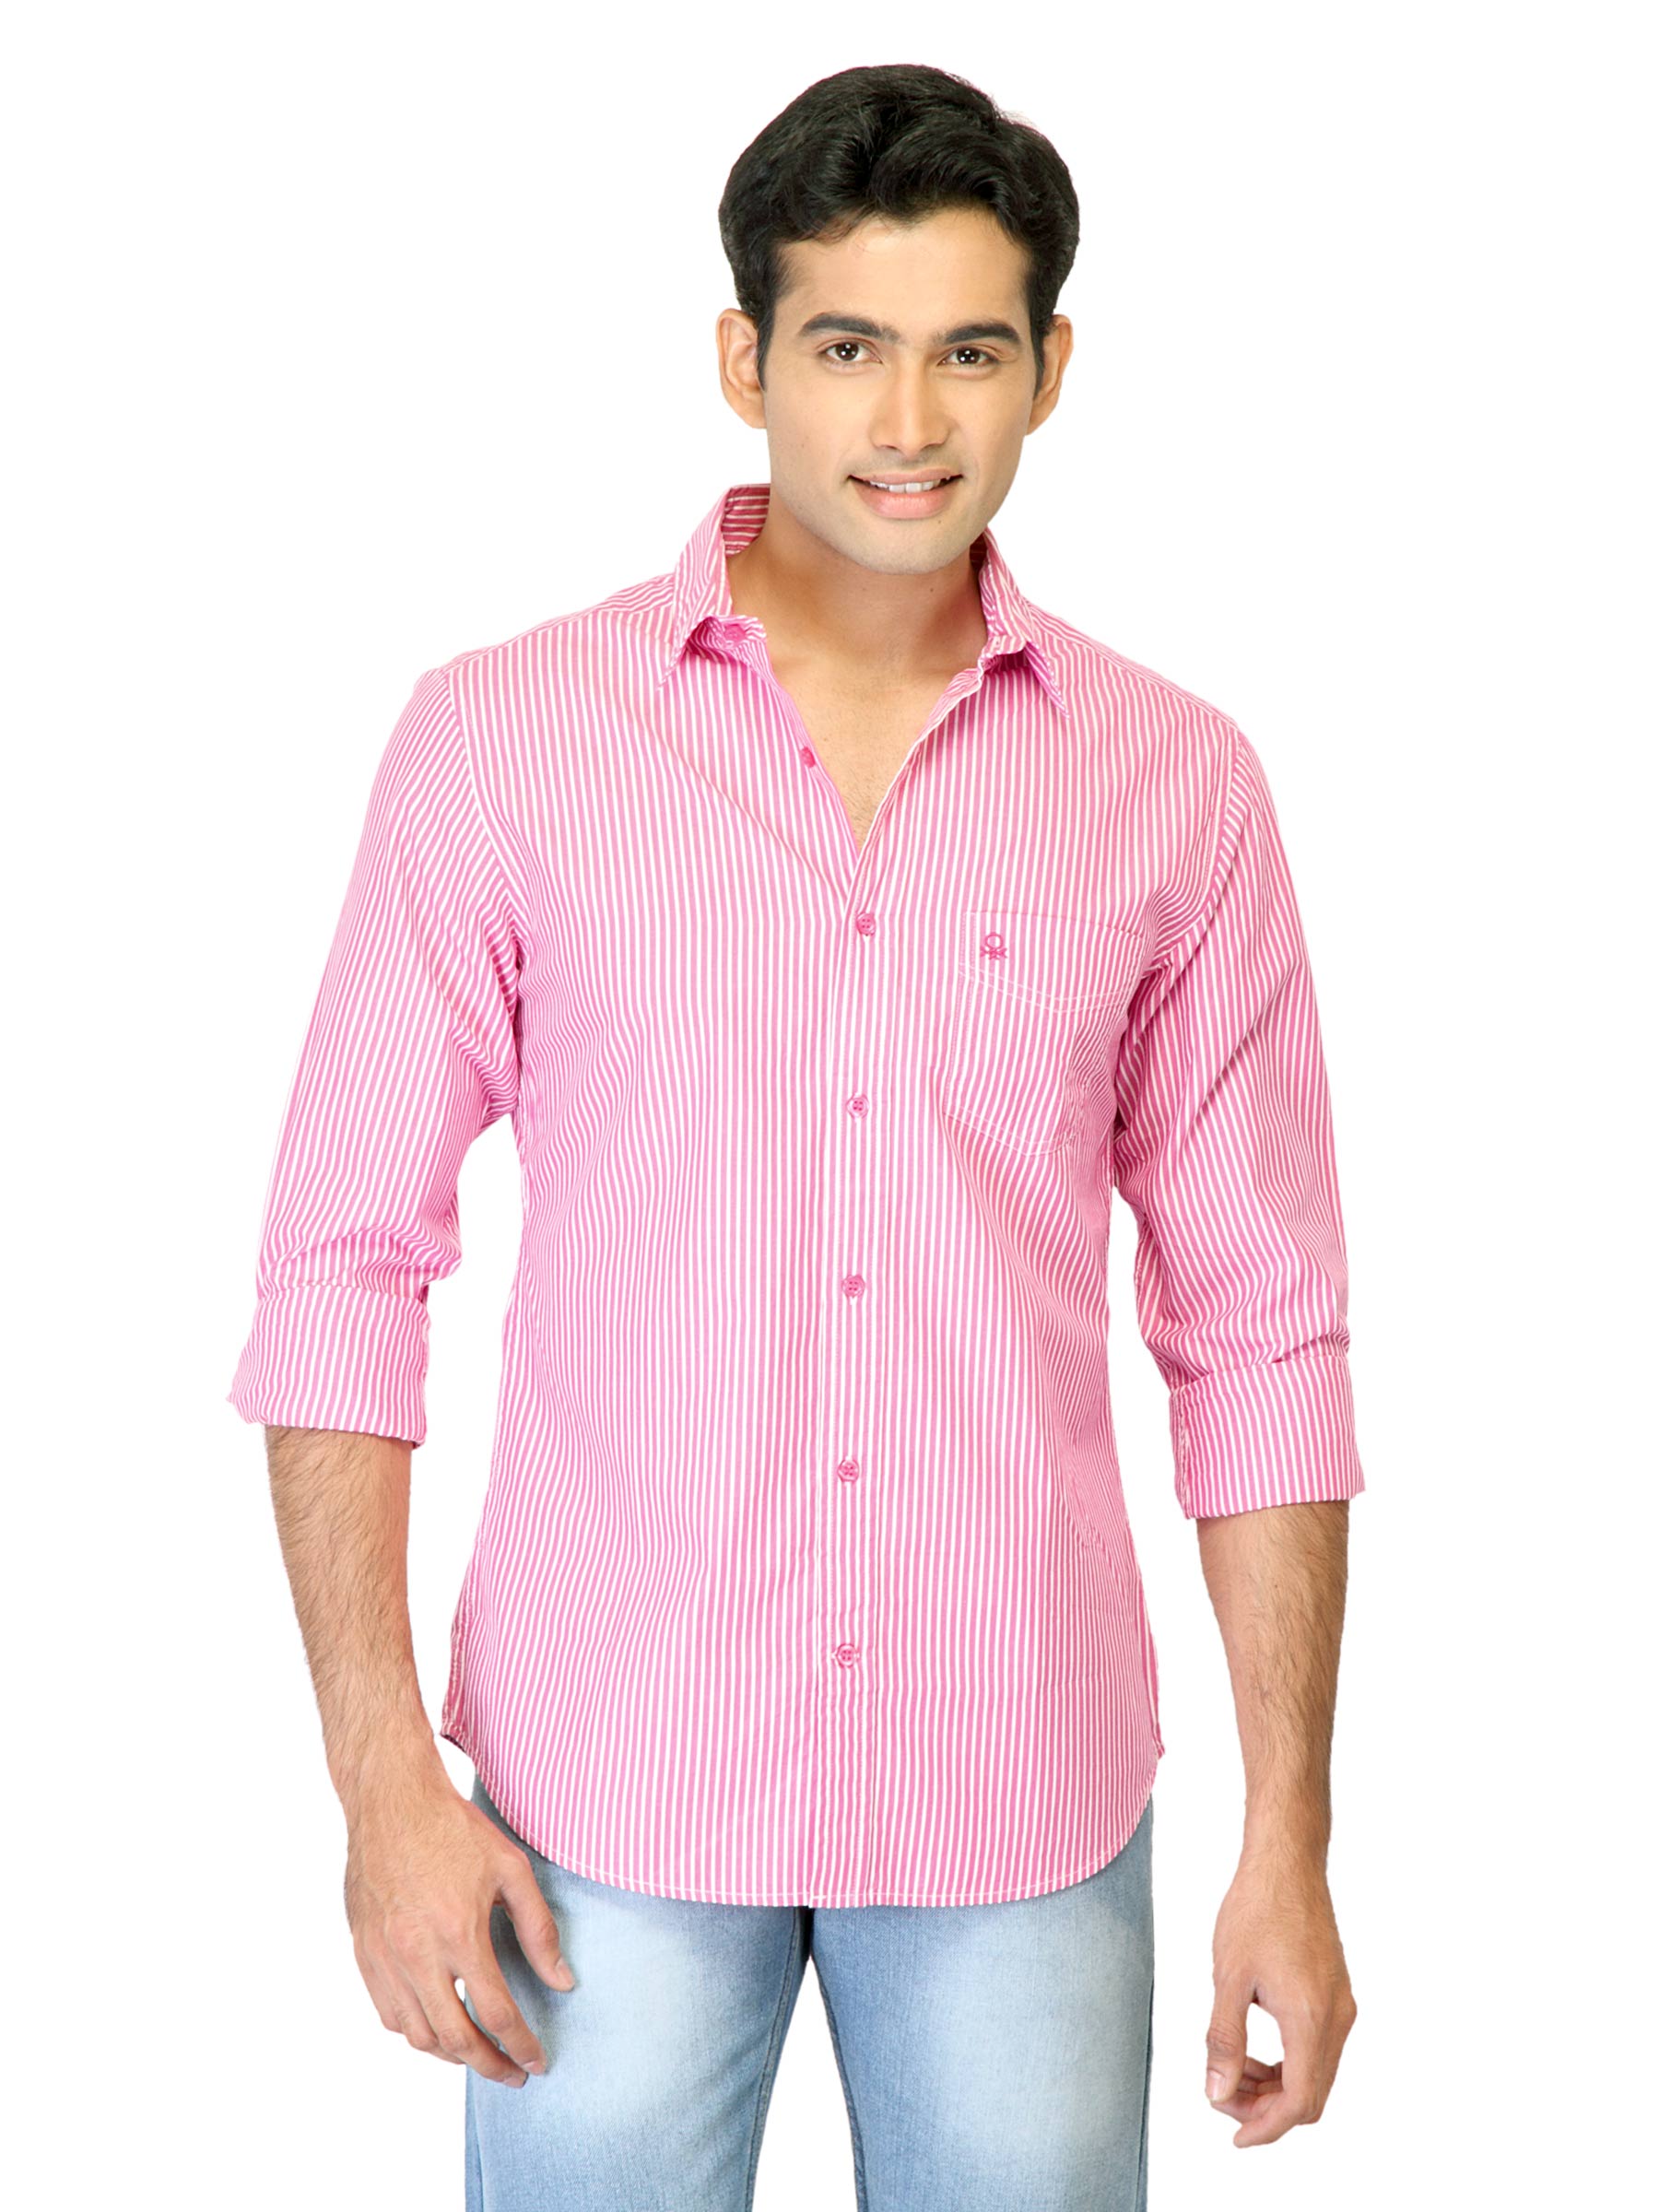 United Colors of Benetton Men Stripes Pink Shirts